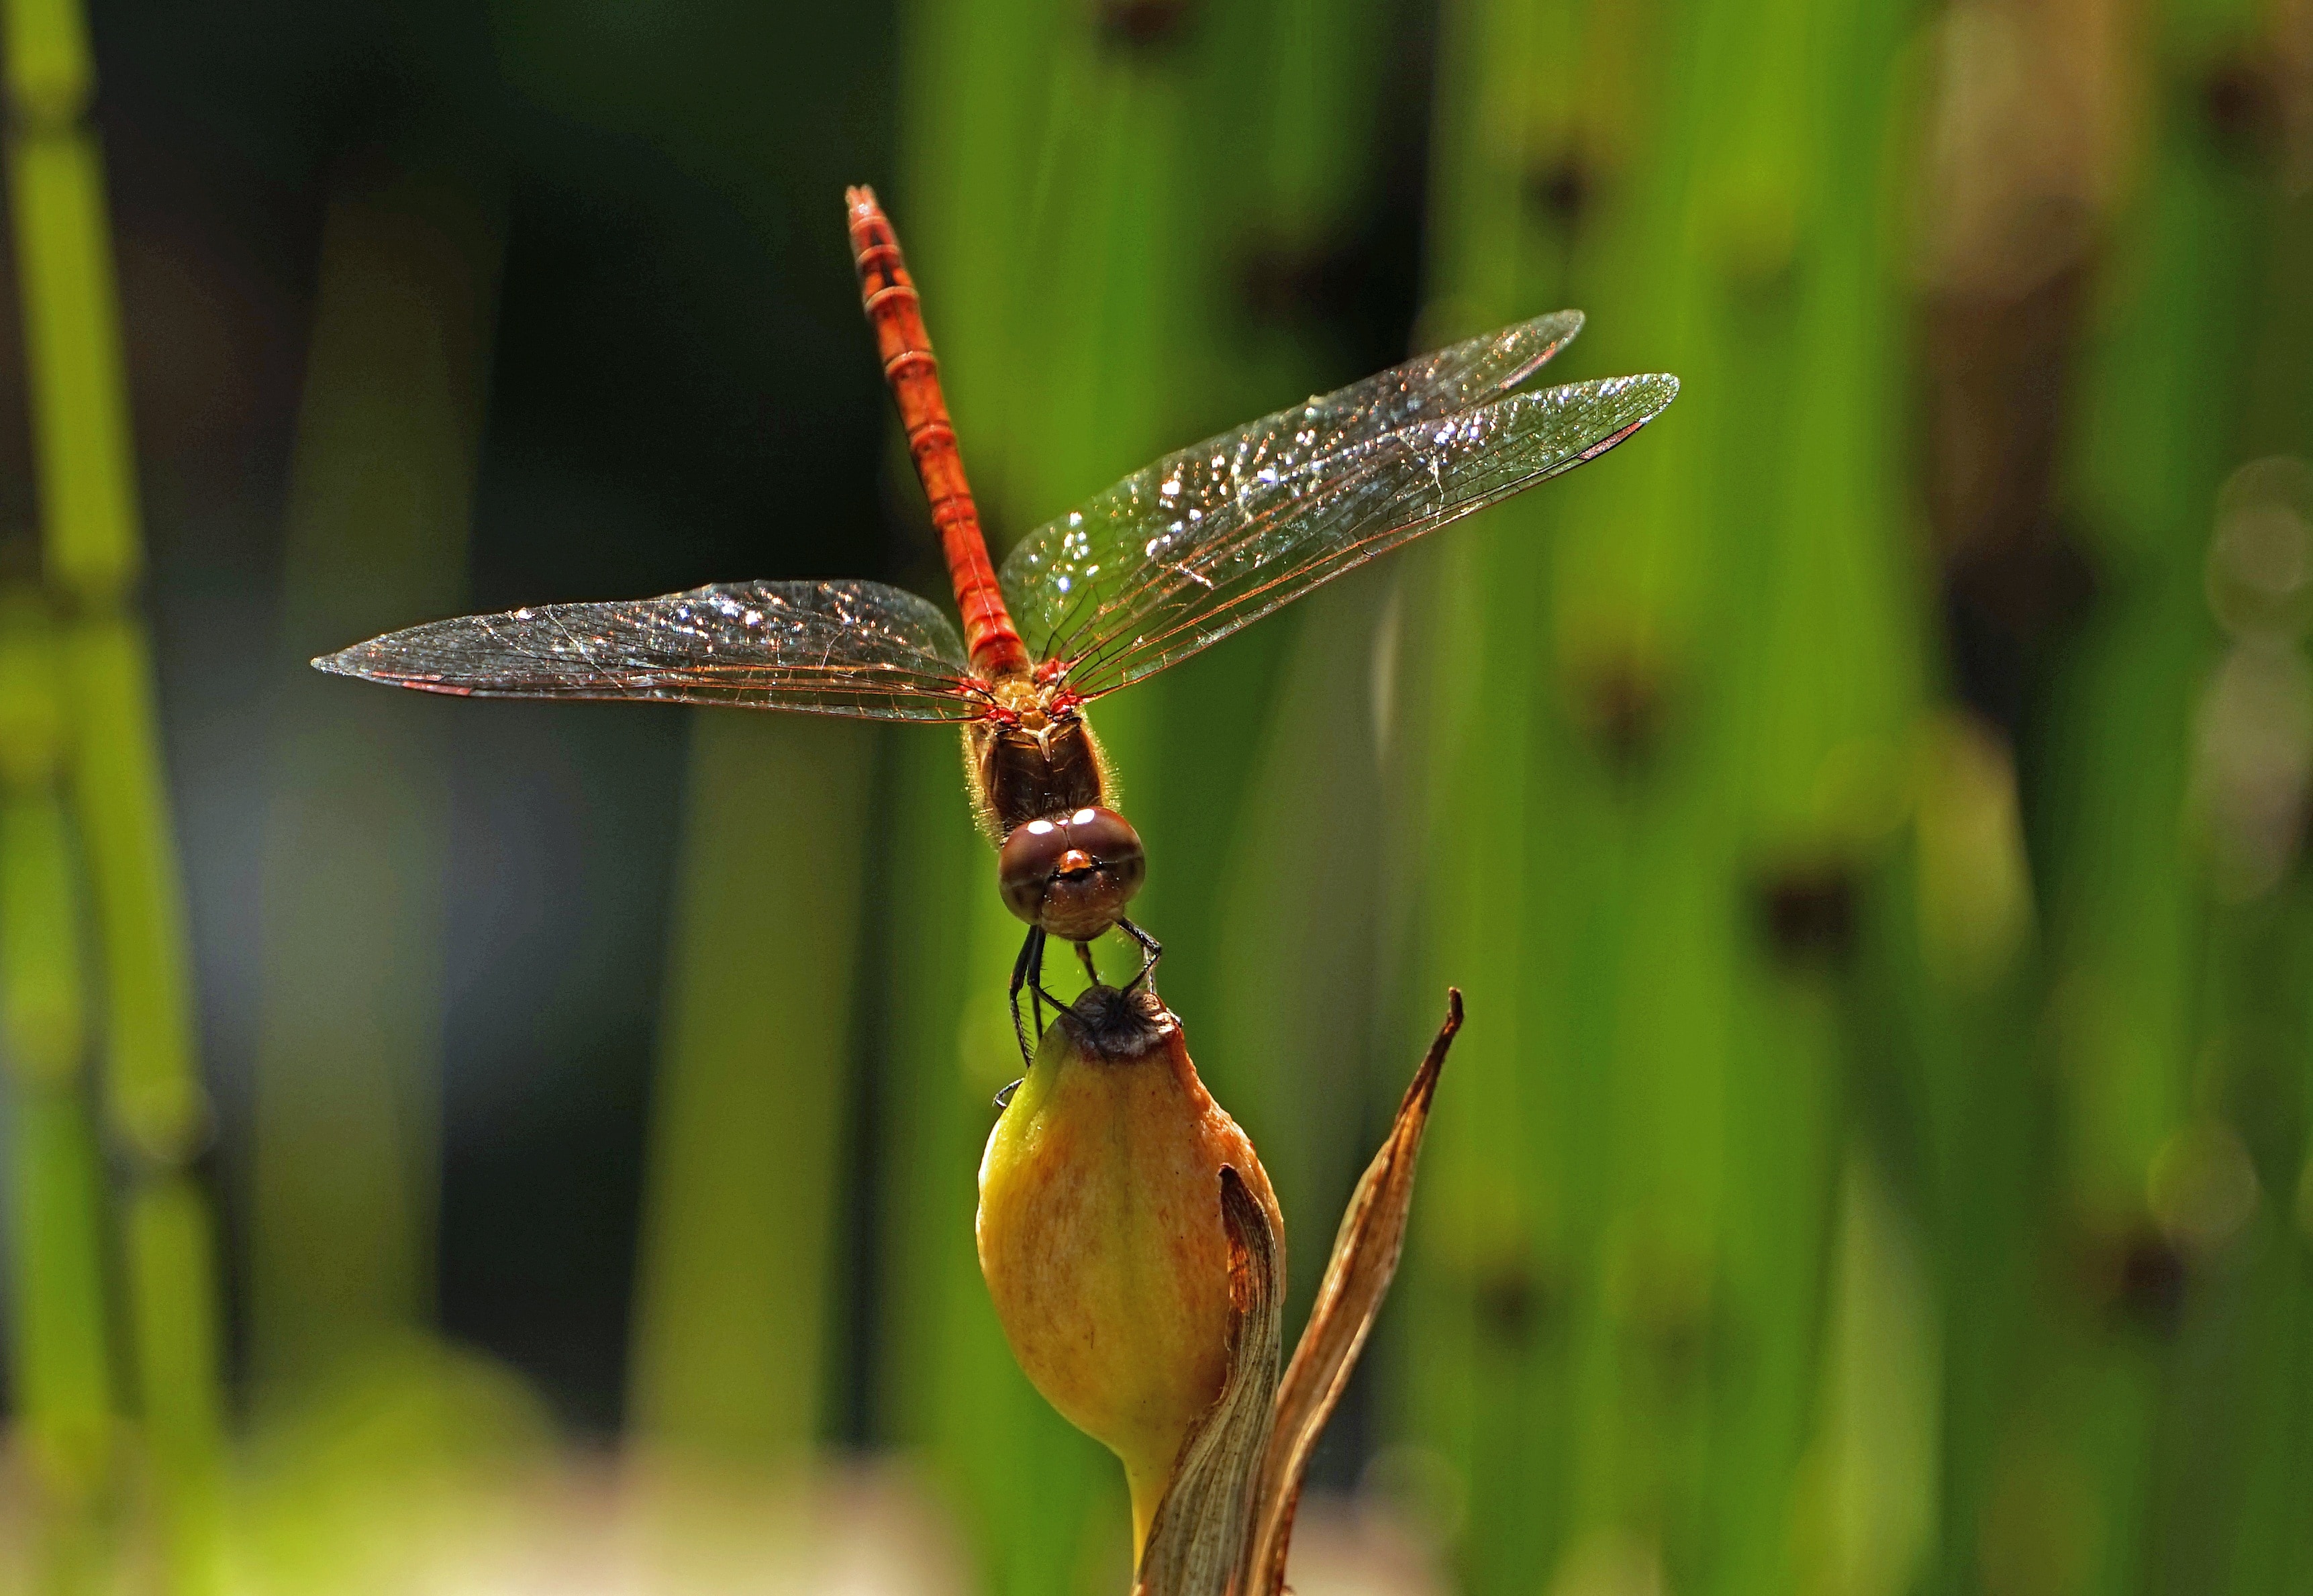 Dragonfly, Wing, Halm, Insect, one animal, animal themes